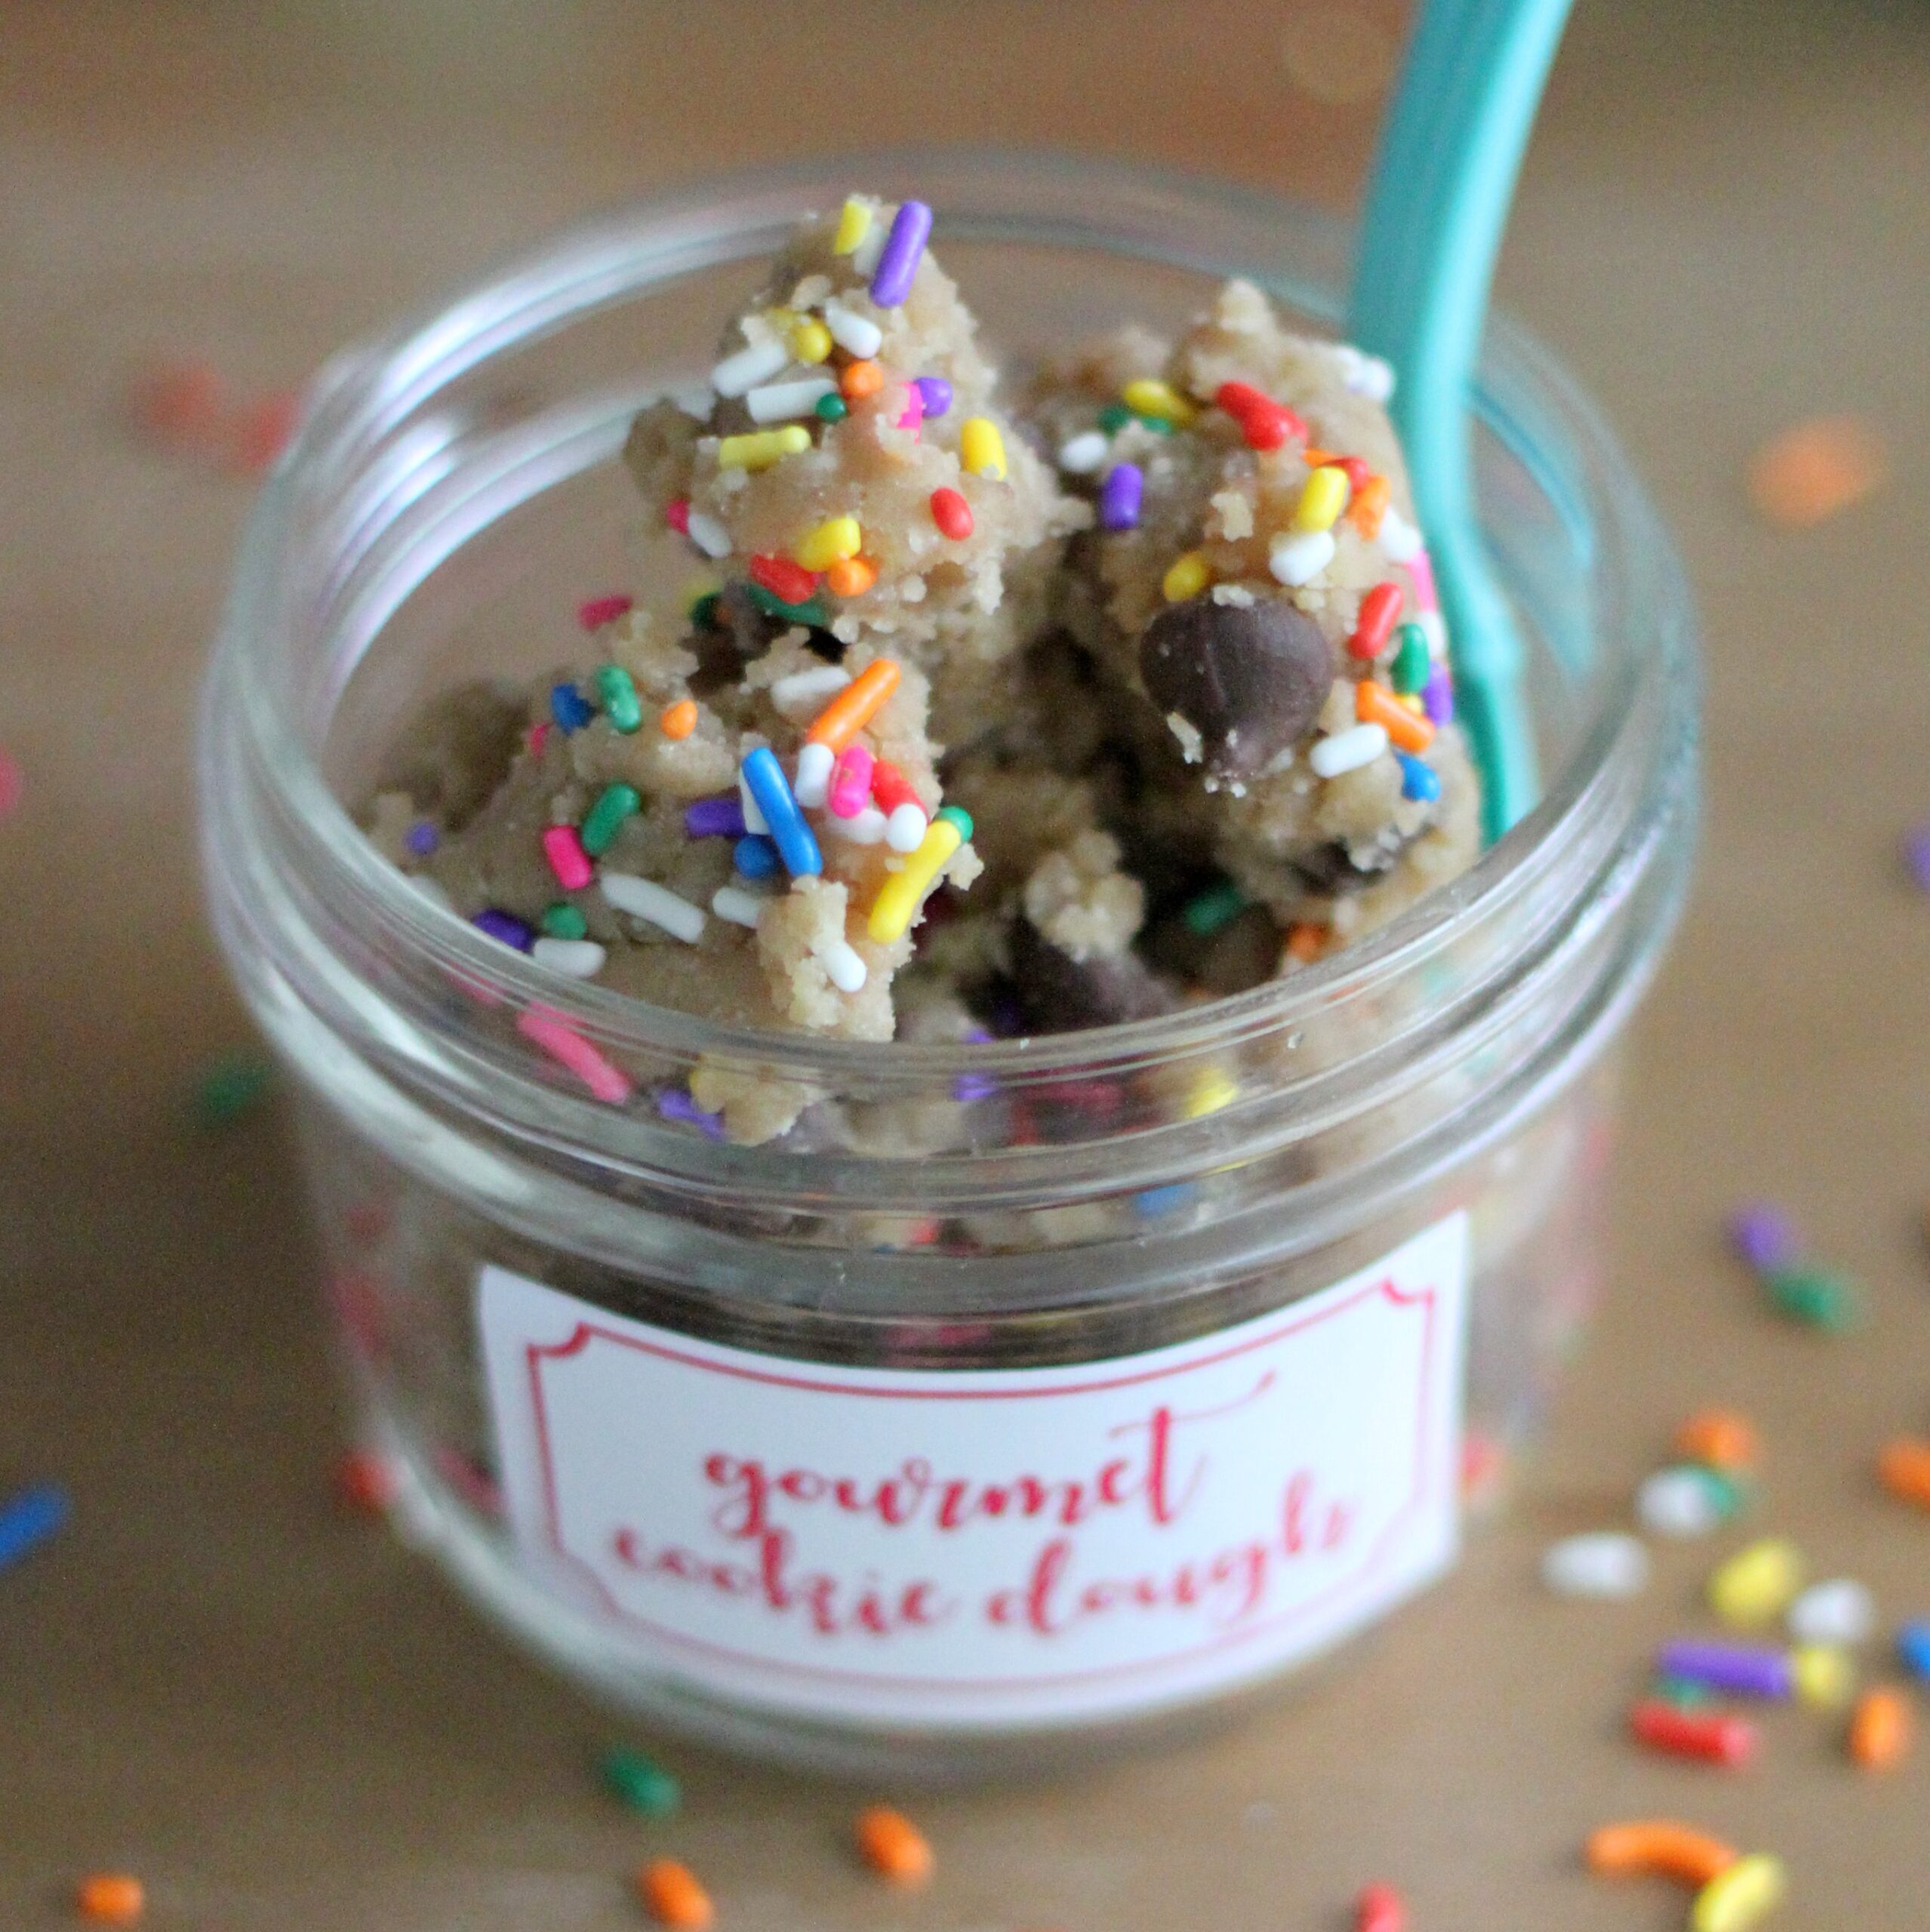 how to make edible gourmet birthday cookie dough (makes a great gift!)